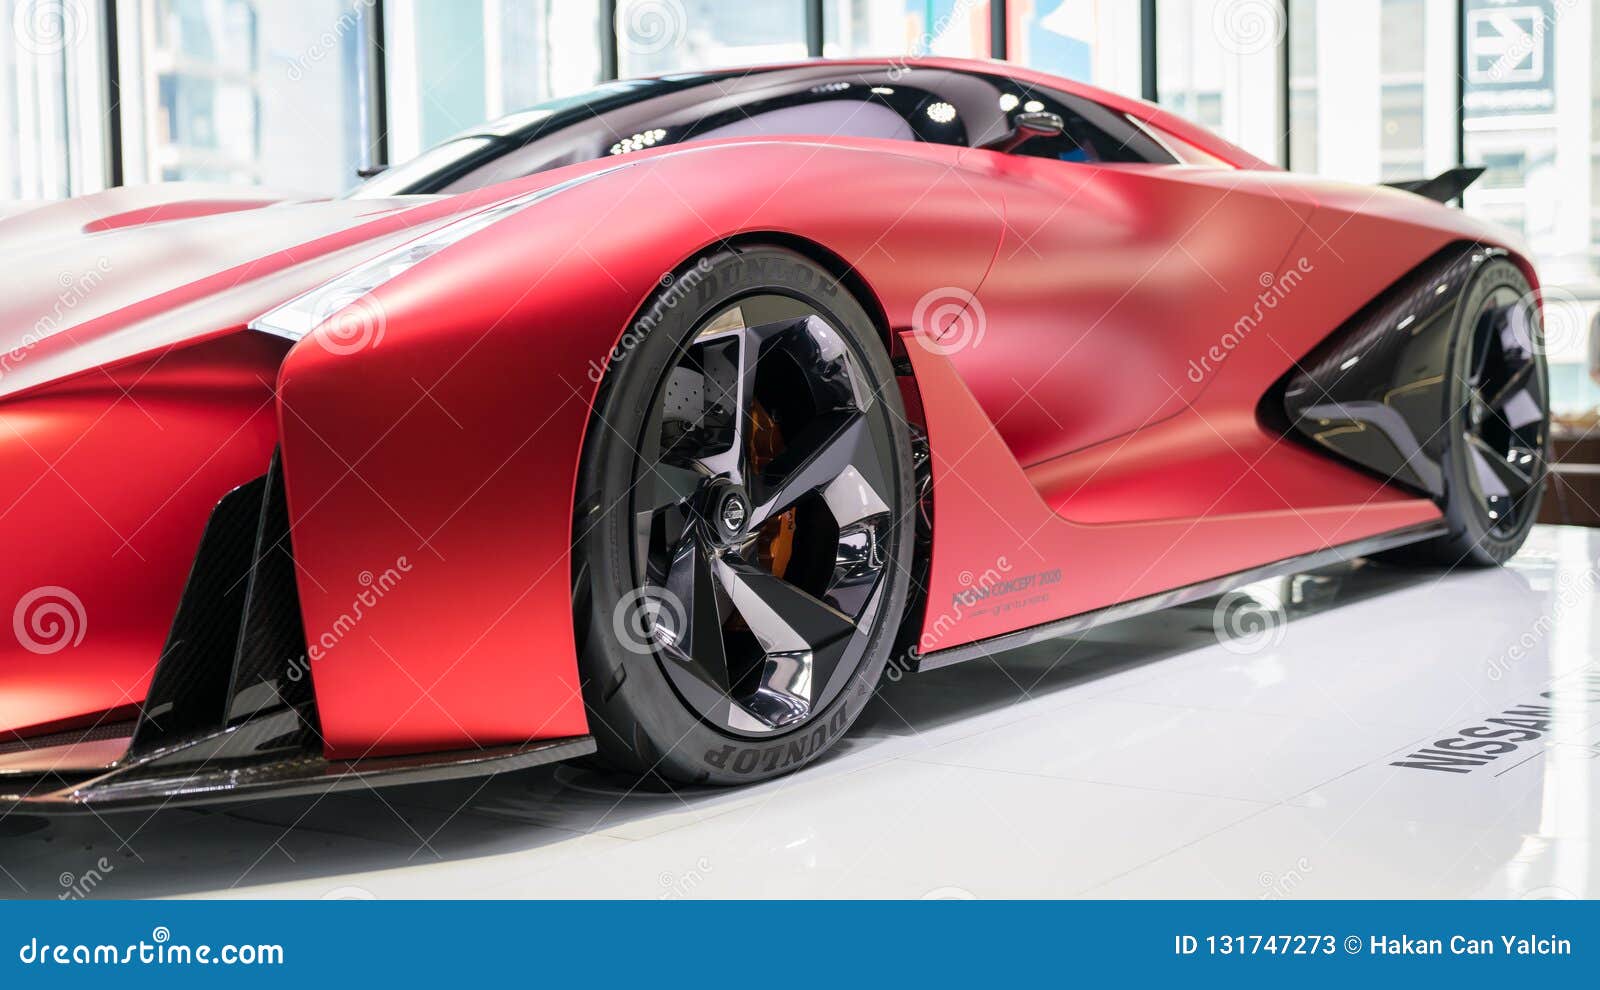 The Nissan Concept Vision Gran Turismo Vehicle On Display At Nissan Crossing Showroom In The Editorial Stock Photo Image Of Industry Japanese